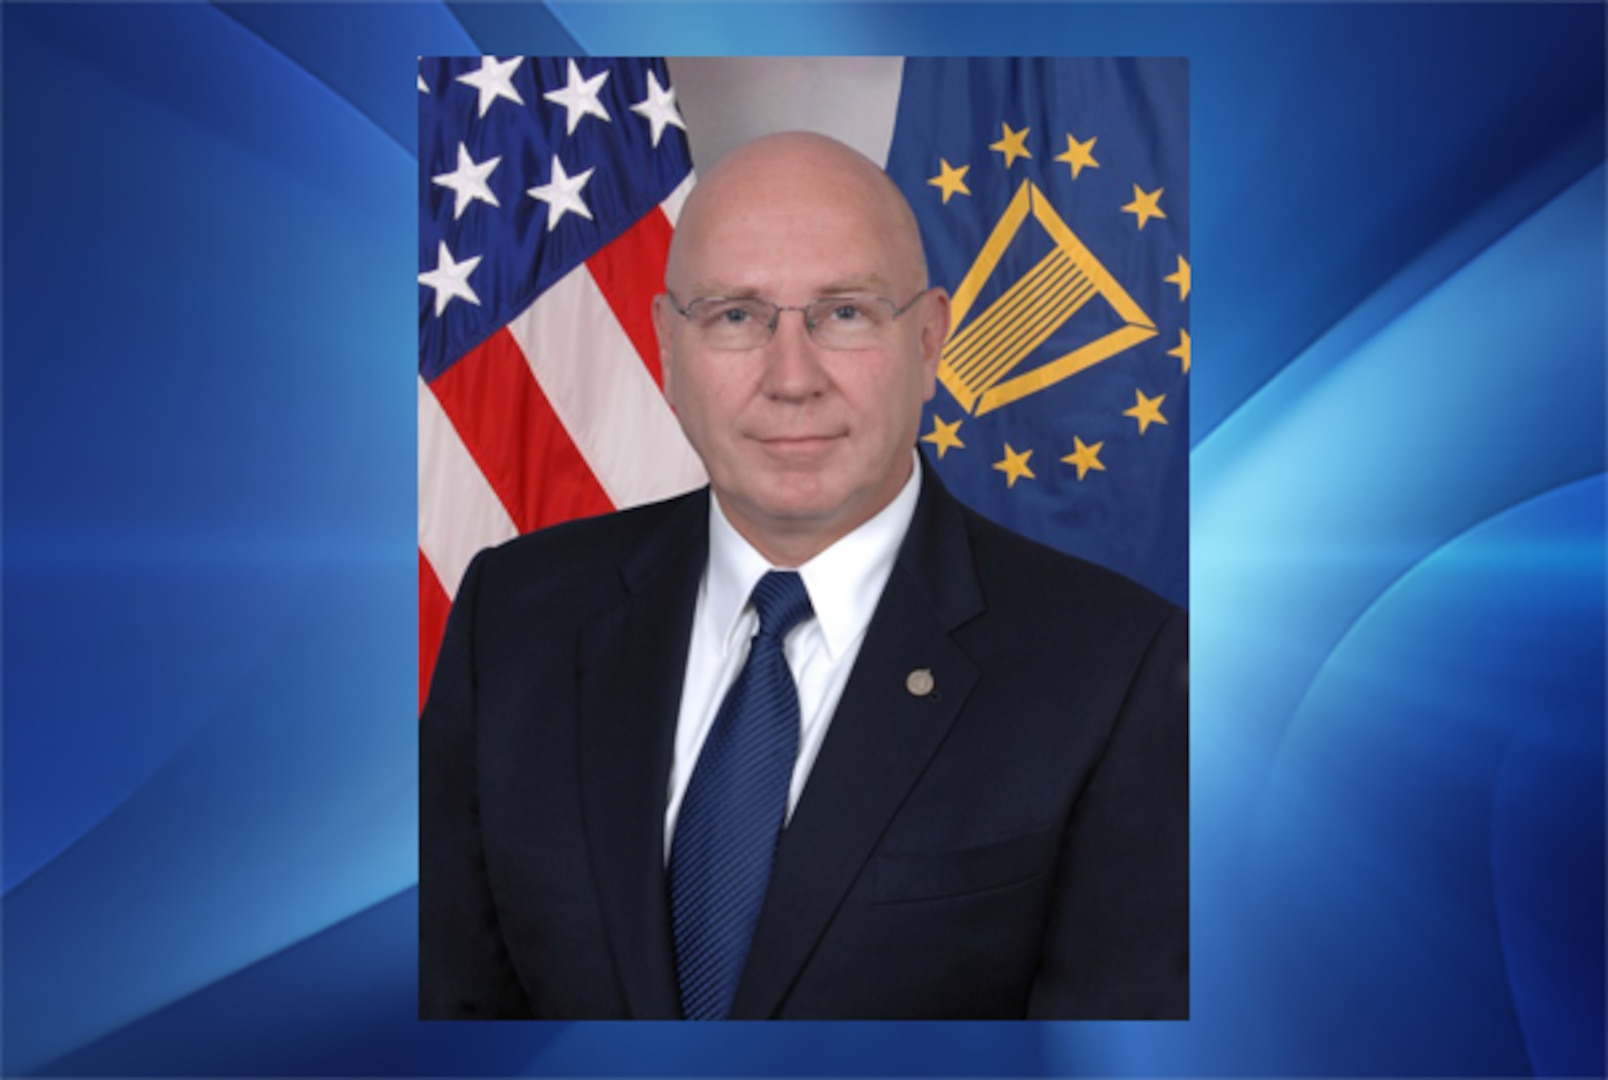 Guy C. Beougher assumes role as DLA Energy deputy commander May 30. Prior to this position, he served as the executive director of Defense Logistics Agency Operations (J3).
